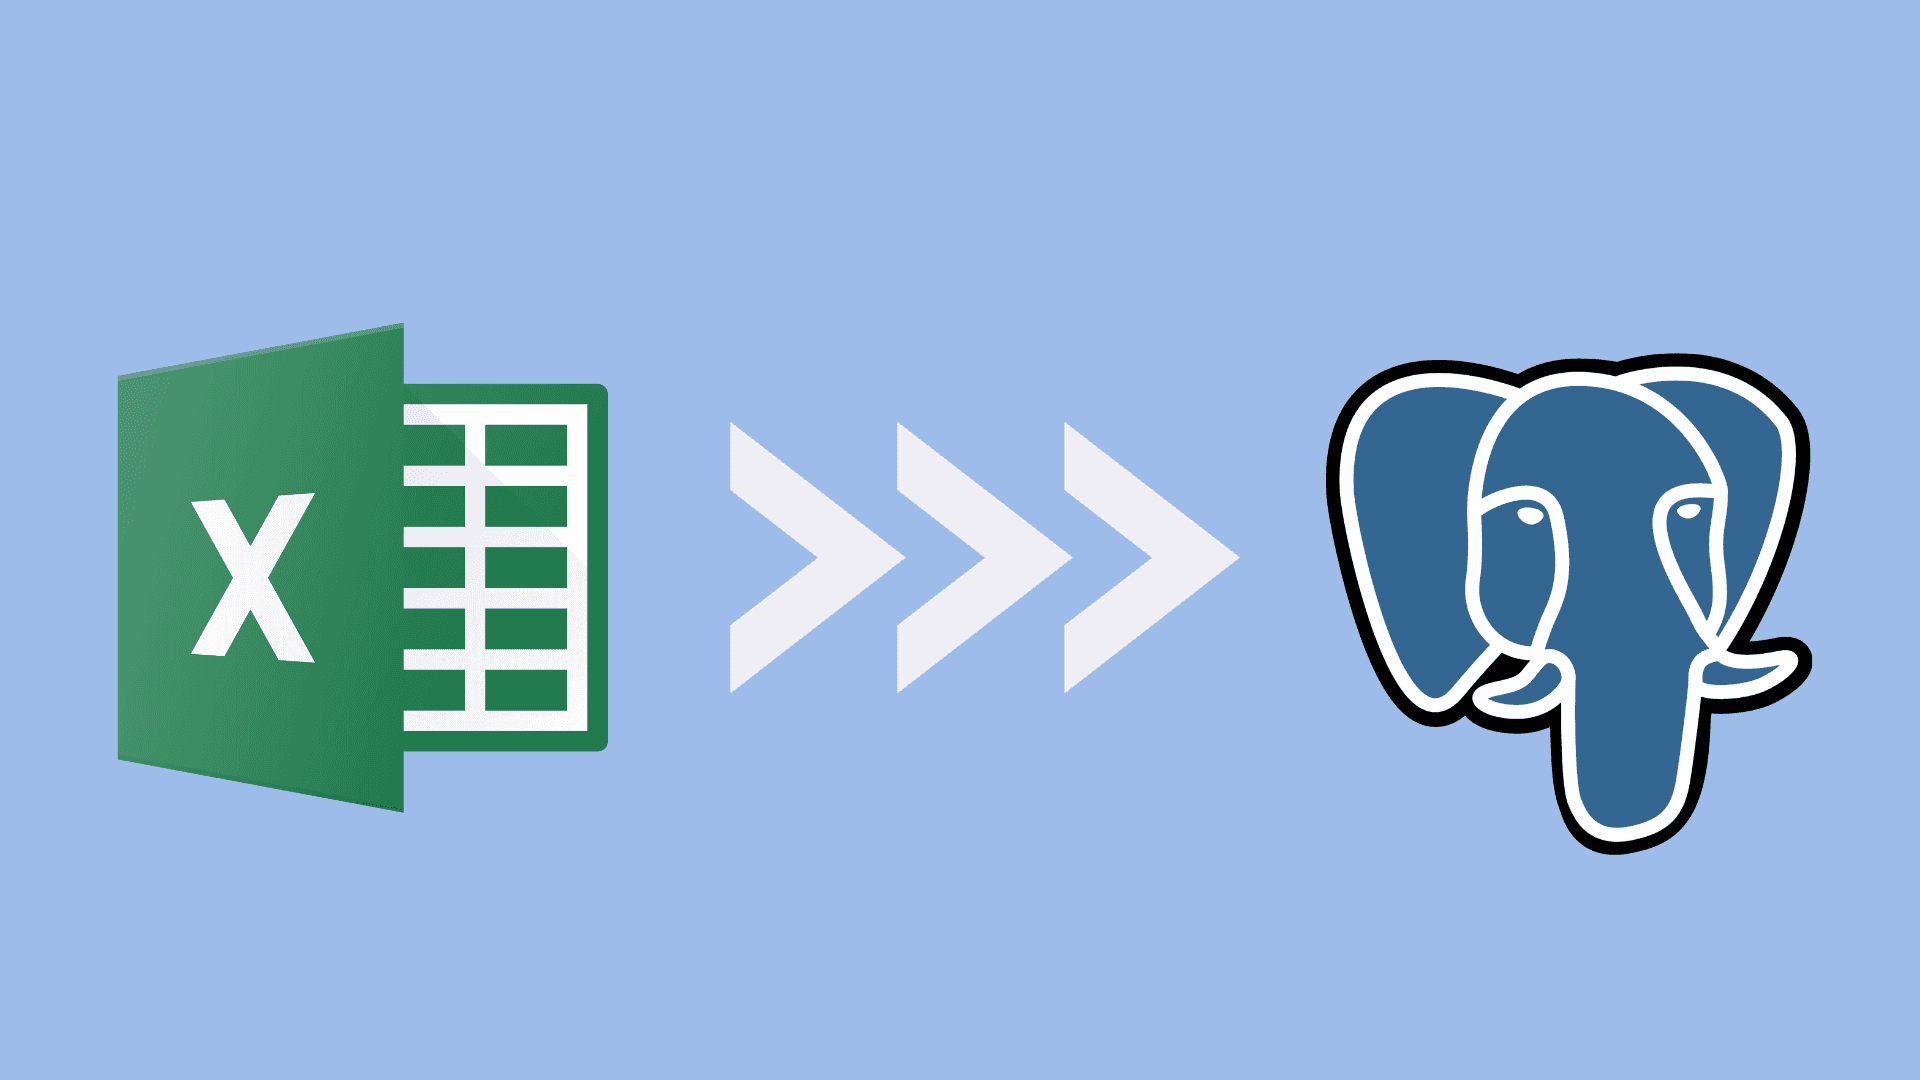 Connect Excel to PostgreSQL Database: A Quick and Easy Guide